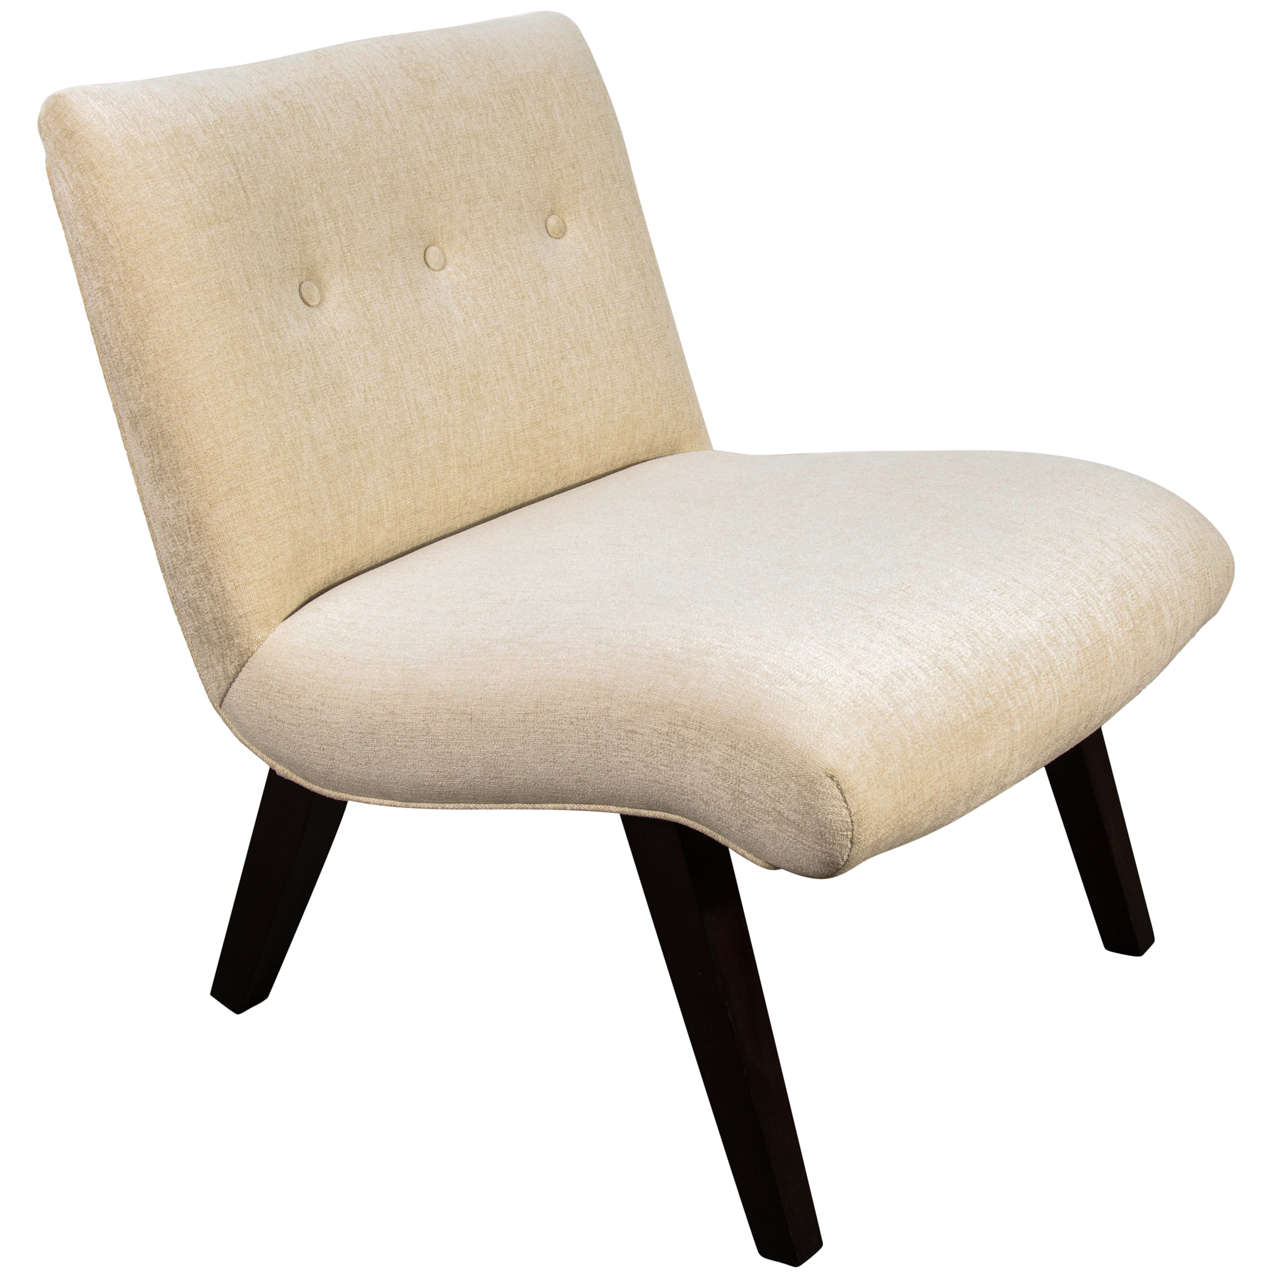 Mid-Century Modern Slipper Chair in the Style of Jens Risom